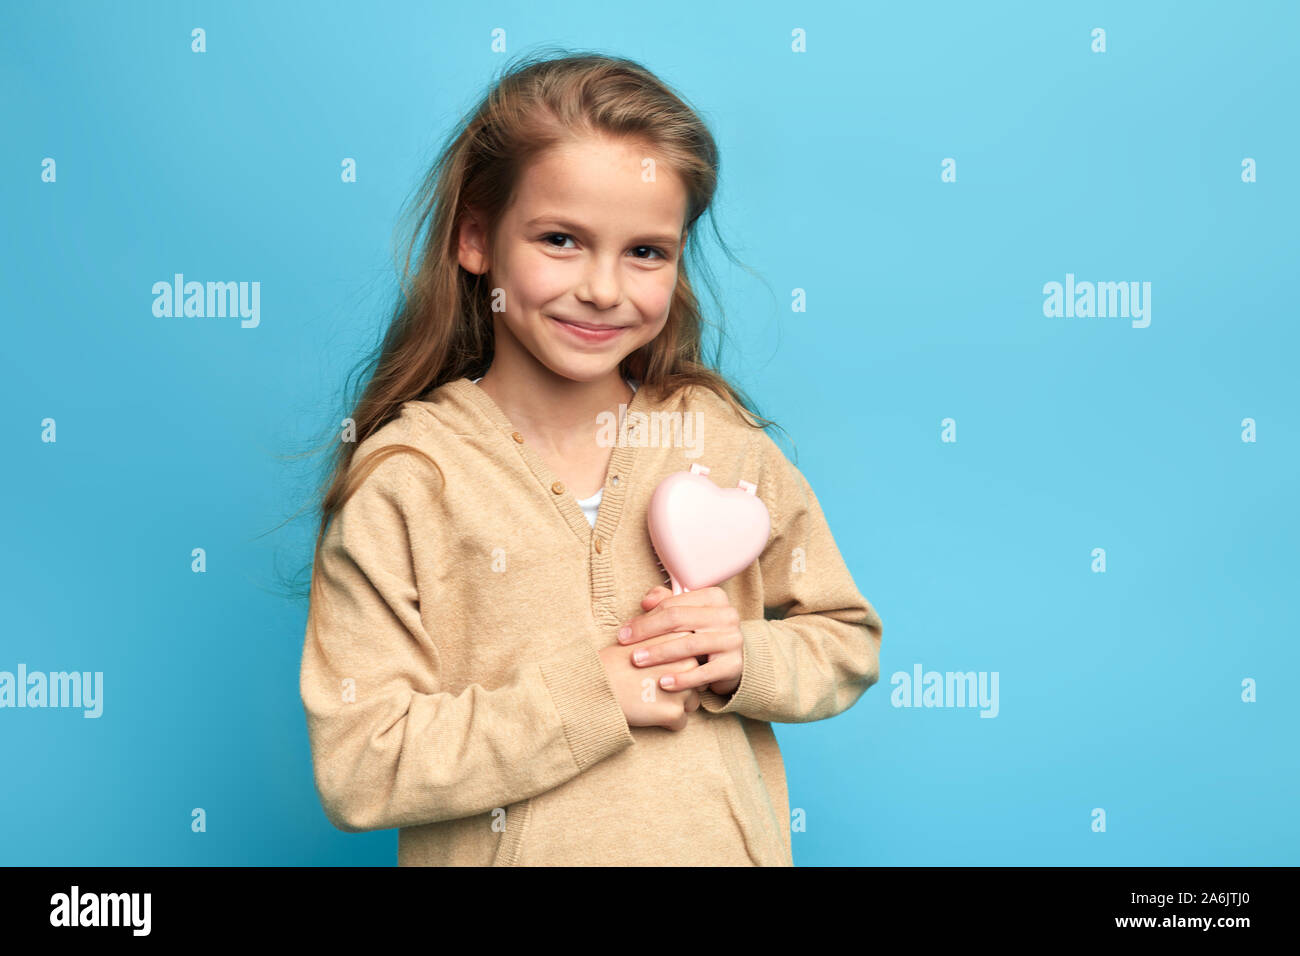 little smiling girl in sweater brushing her hair, preparing for a party, holiday. close up portrait, isolated blue background, studio shot, lifestyle, Stock Photo